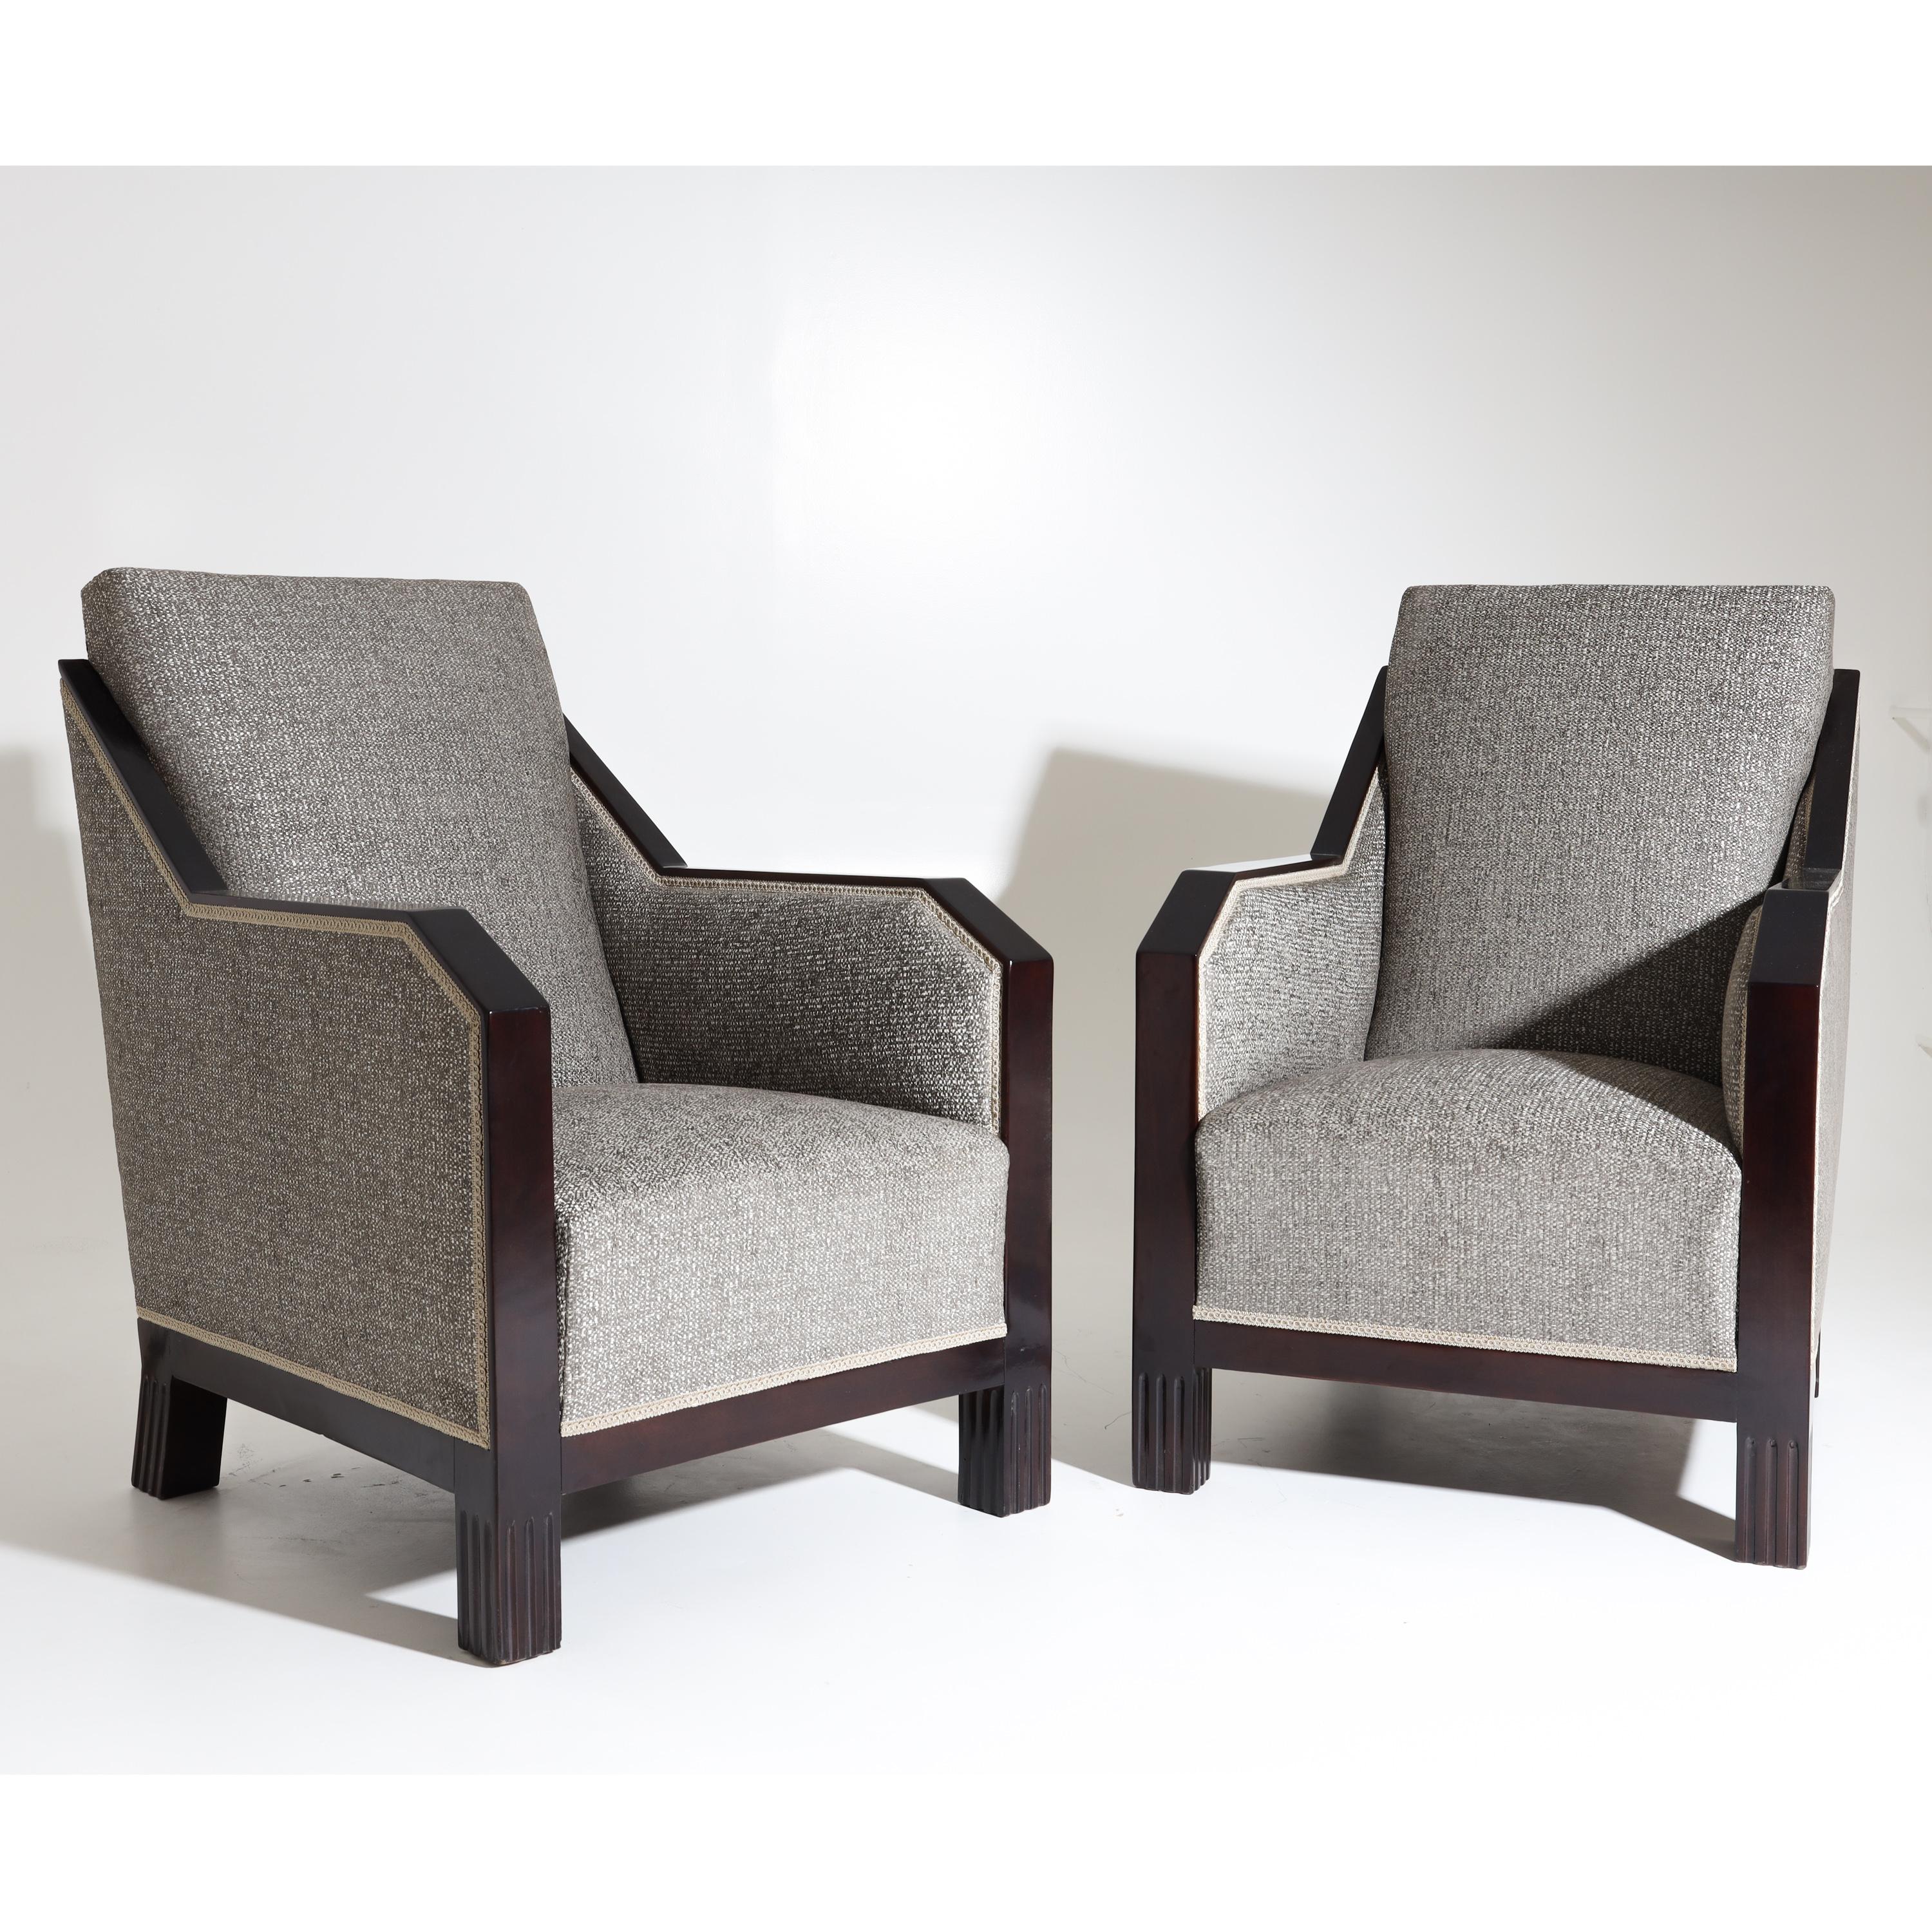 Pair of Art Deco armchairs with high backrests and straight armrests, standing on fluted legs. The armchairs have been newly covered on all sides with a high-quality silver-grey mottled fabric.
 